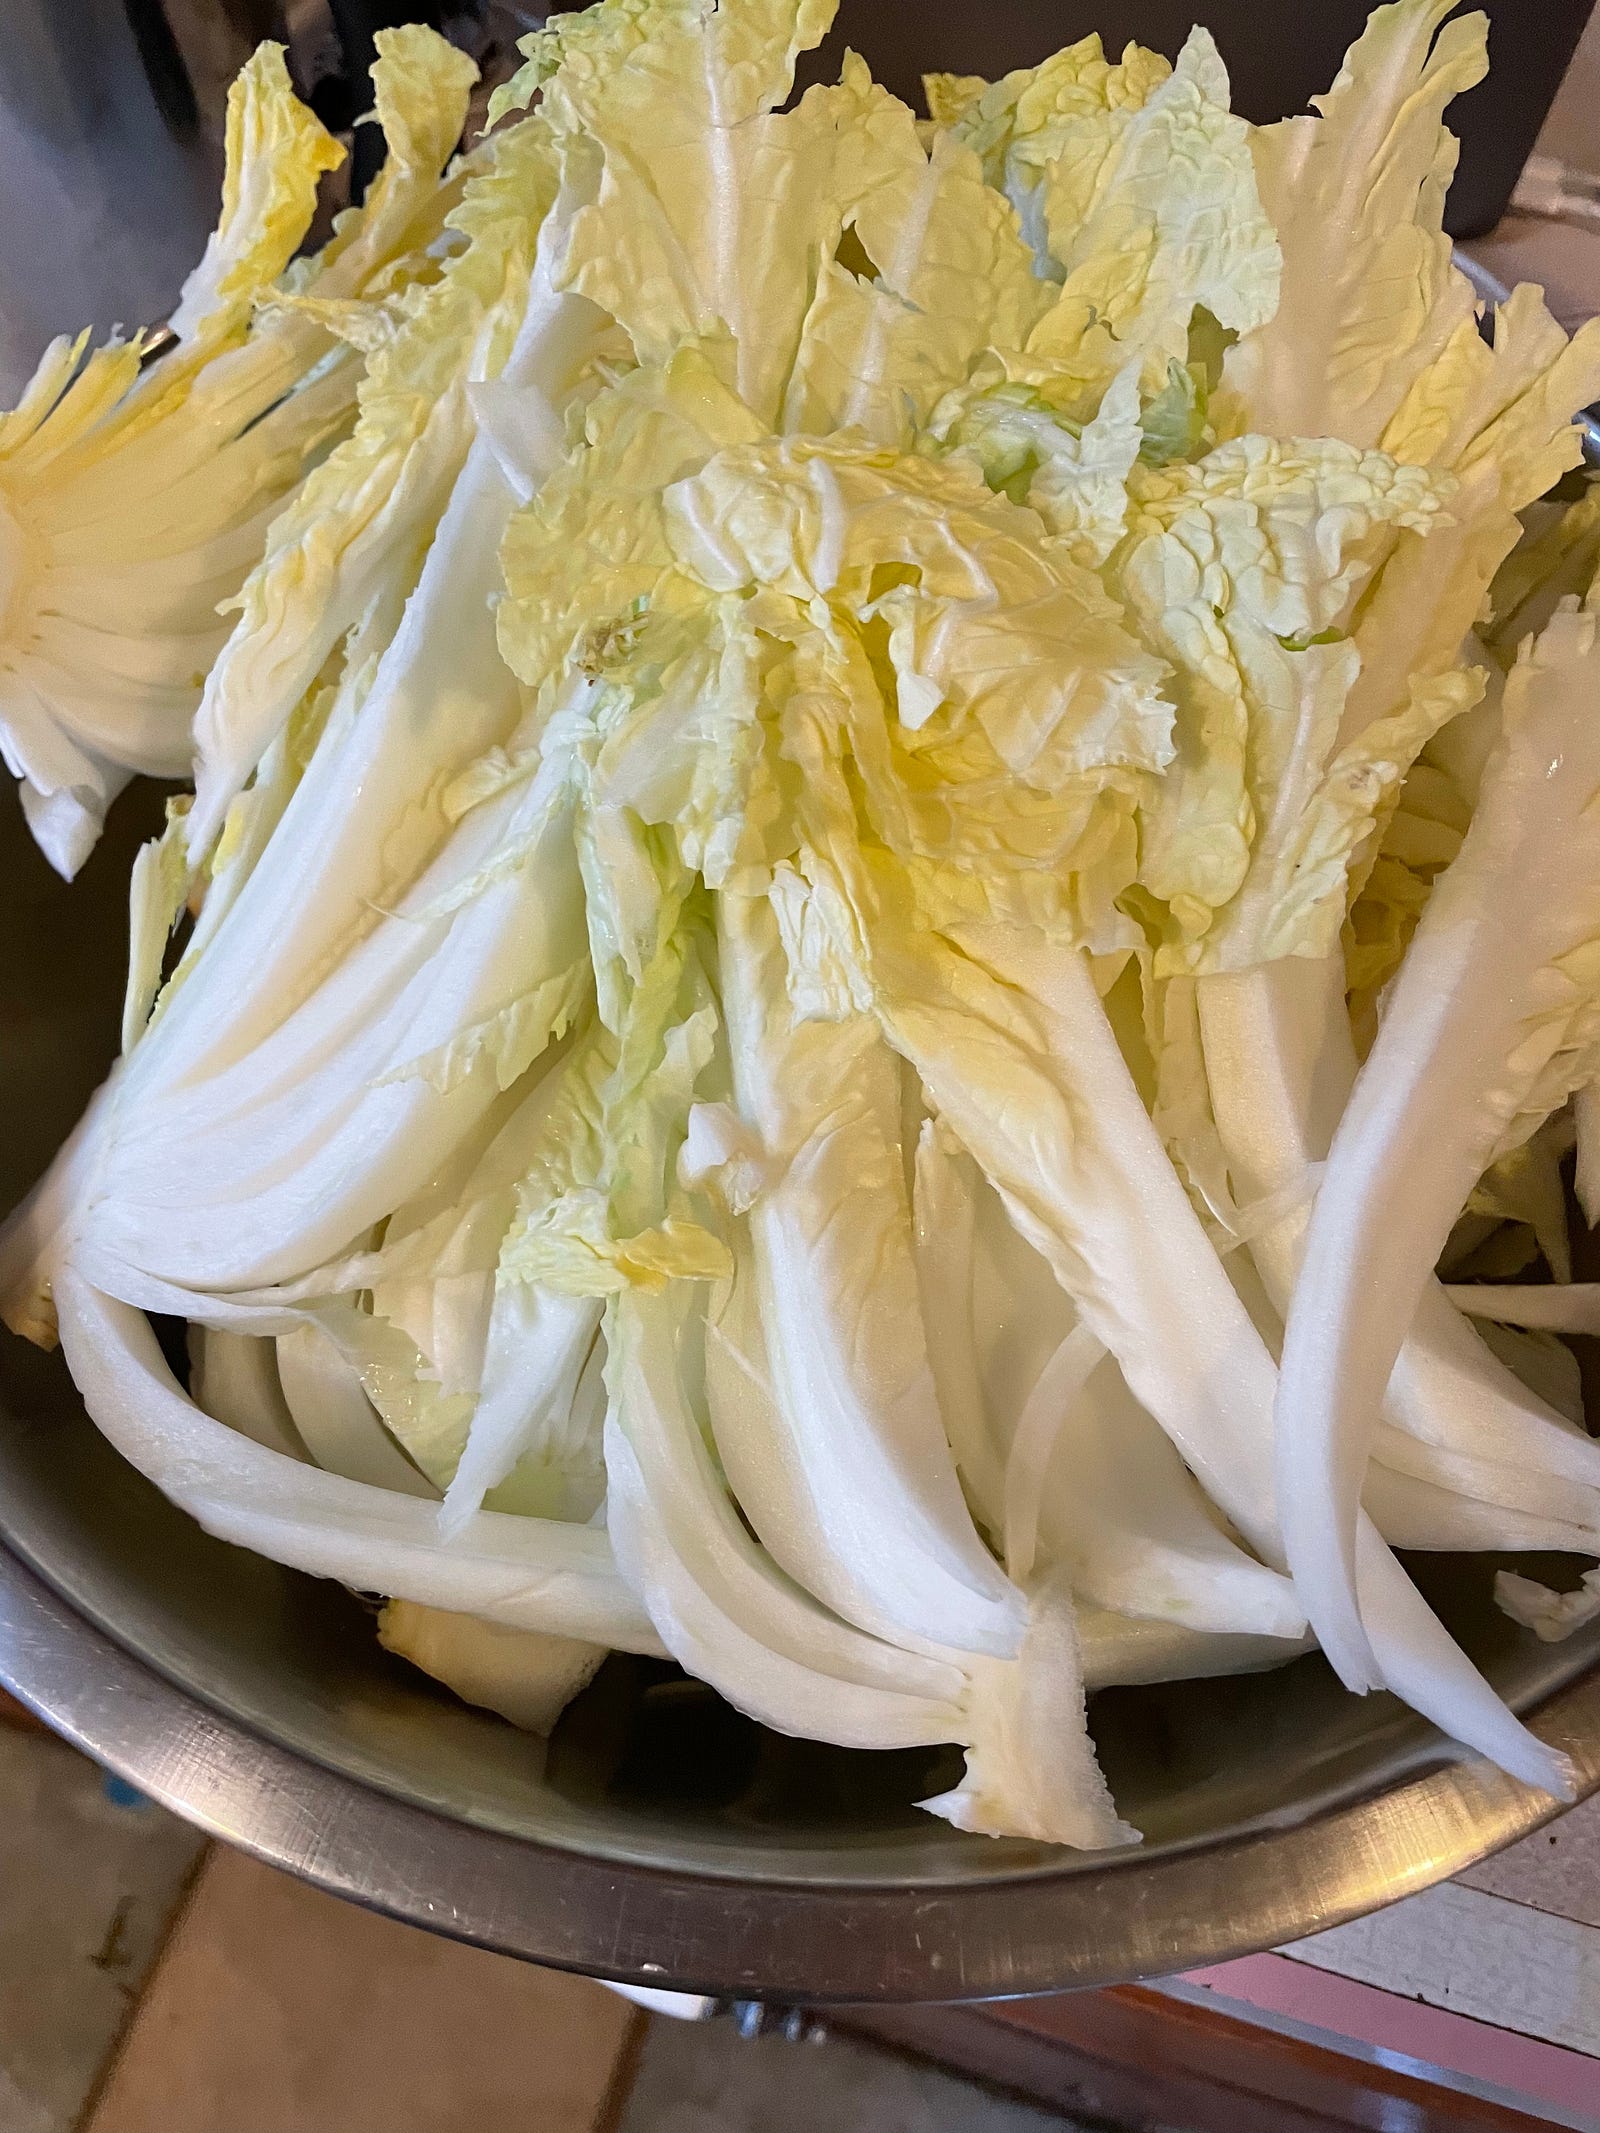 Cabbage wedges filling a large bowl.